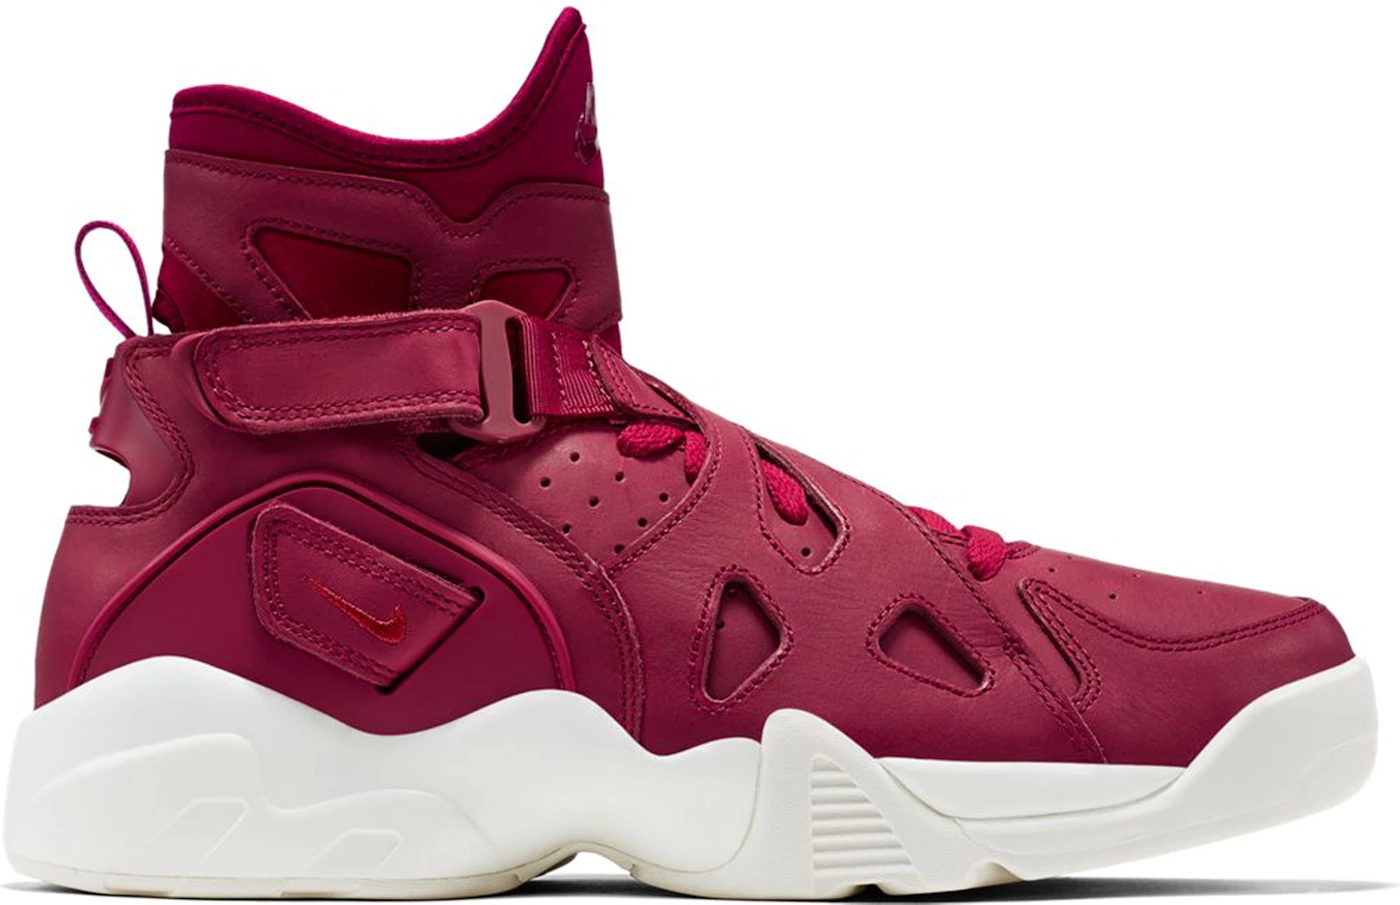 Nike Air Unlimited Noble Red メンズ - 854318-661 - JP